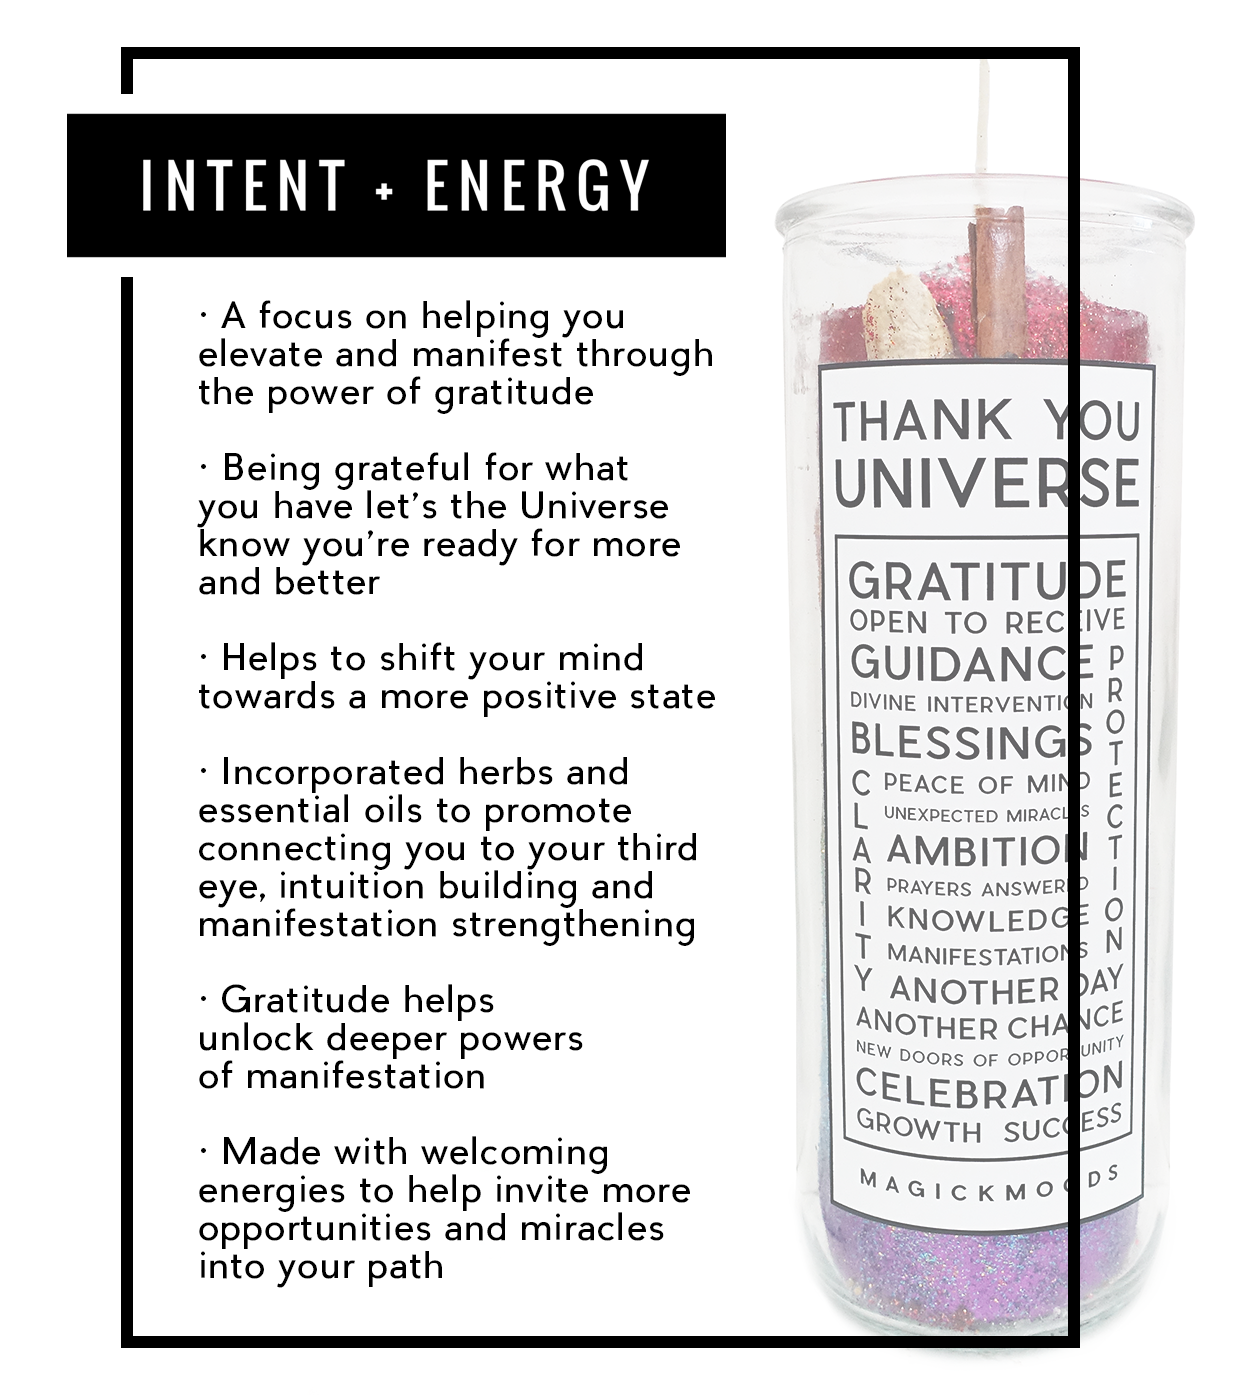 Thank You Universe 7-Day Meditation Candle - PREORDER - Ships by July 28th, 2023